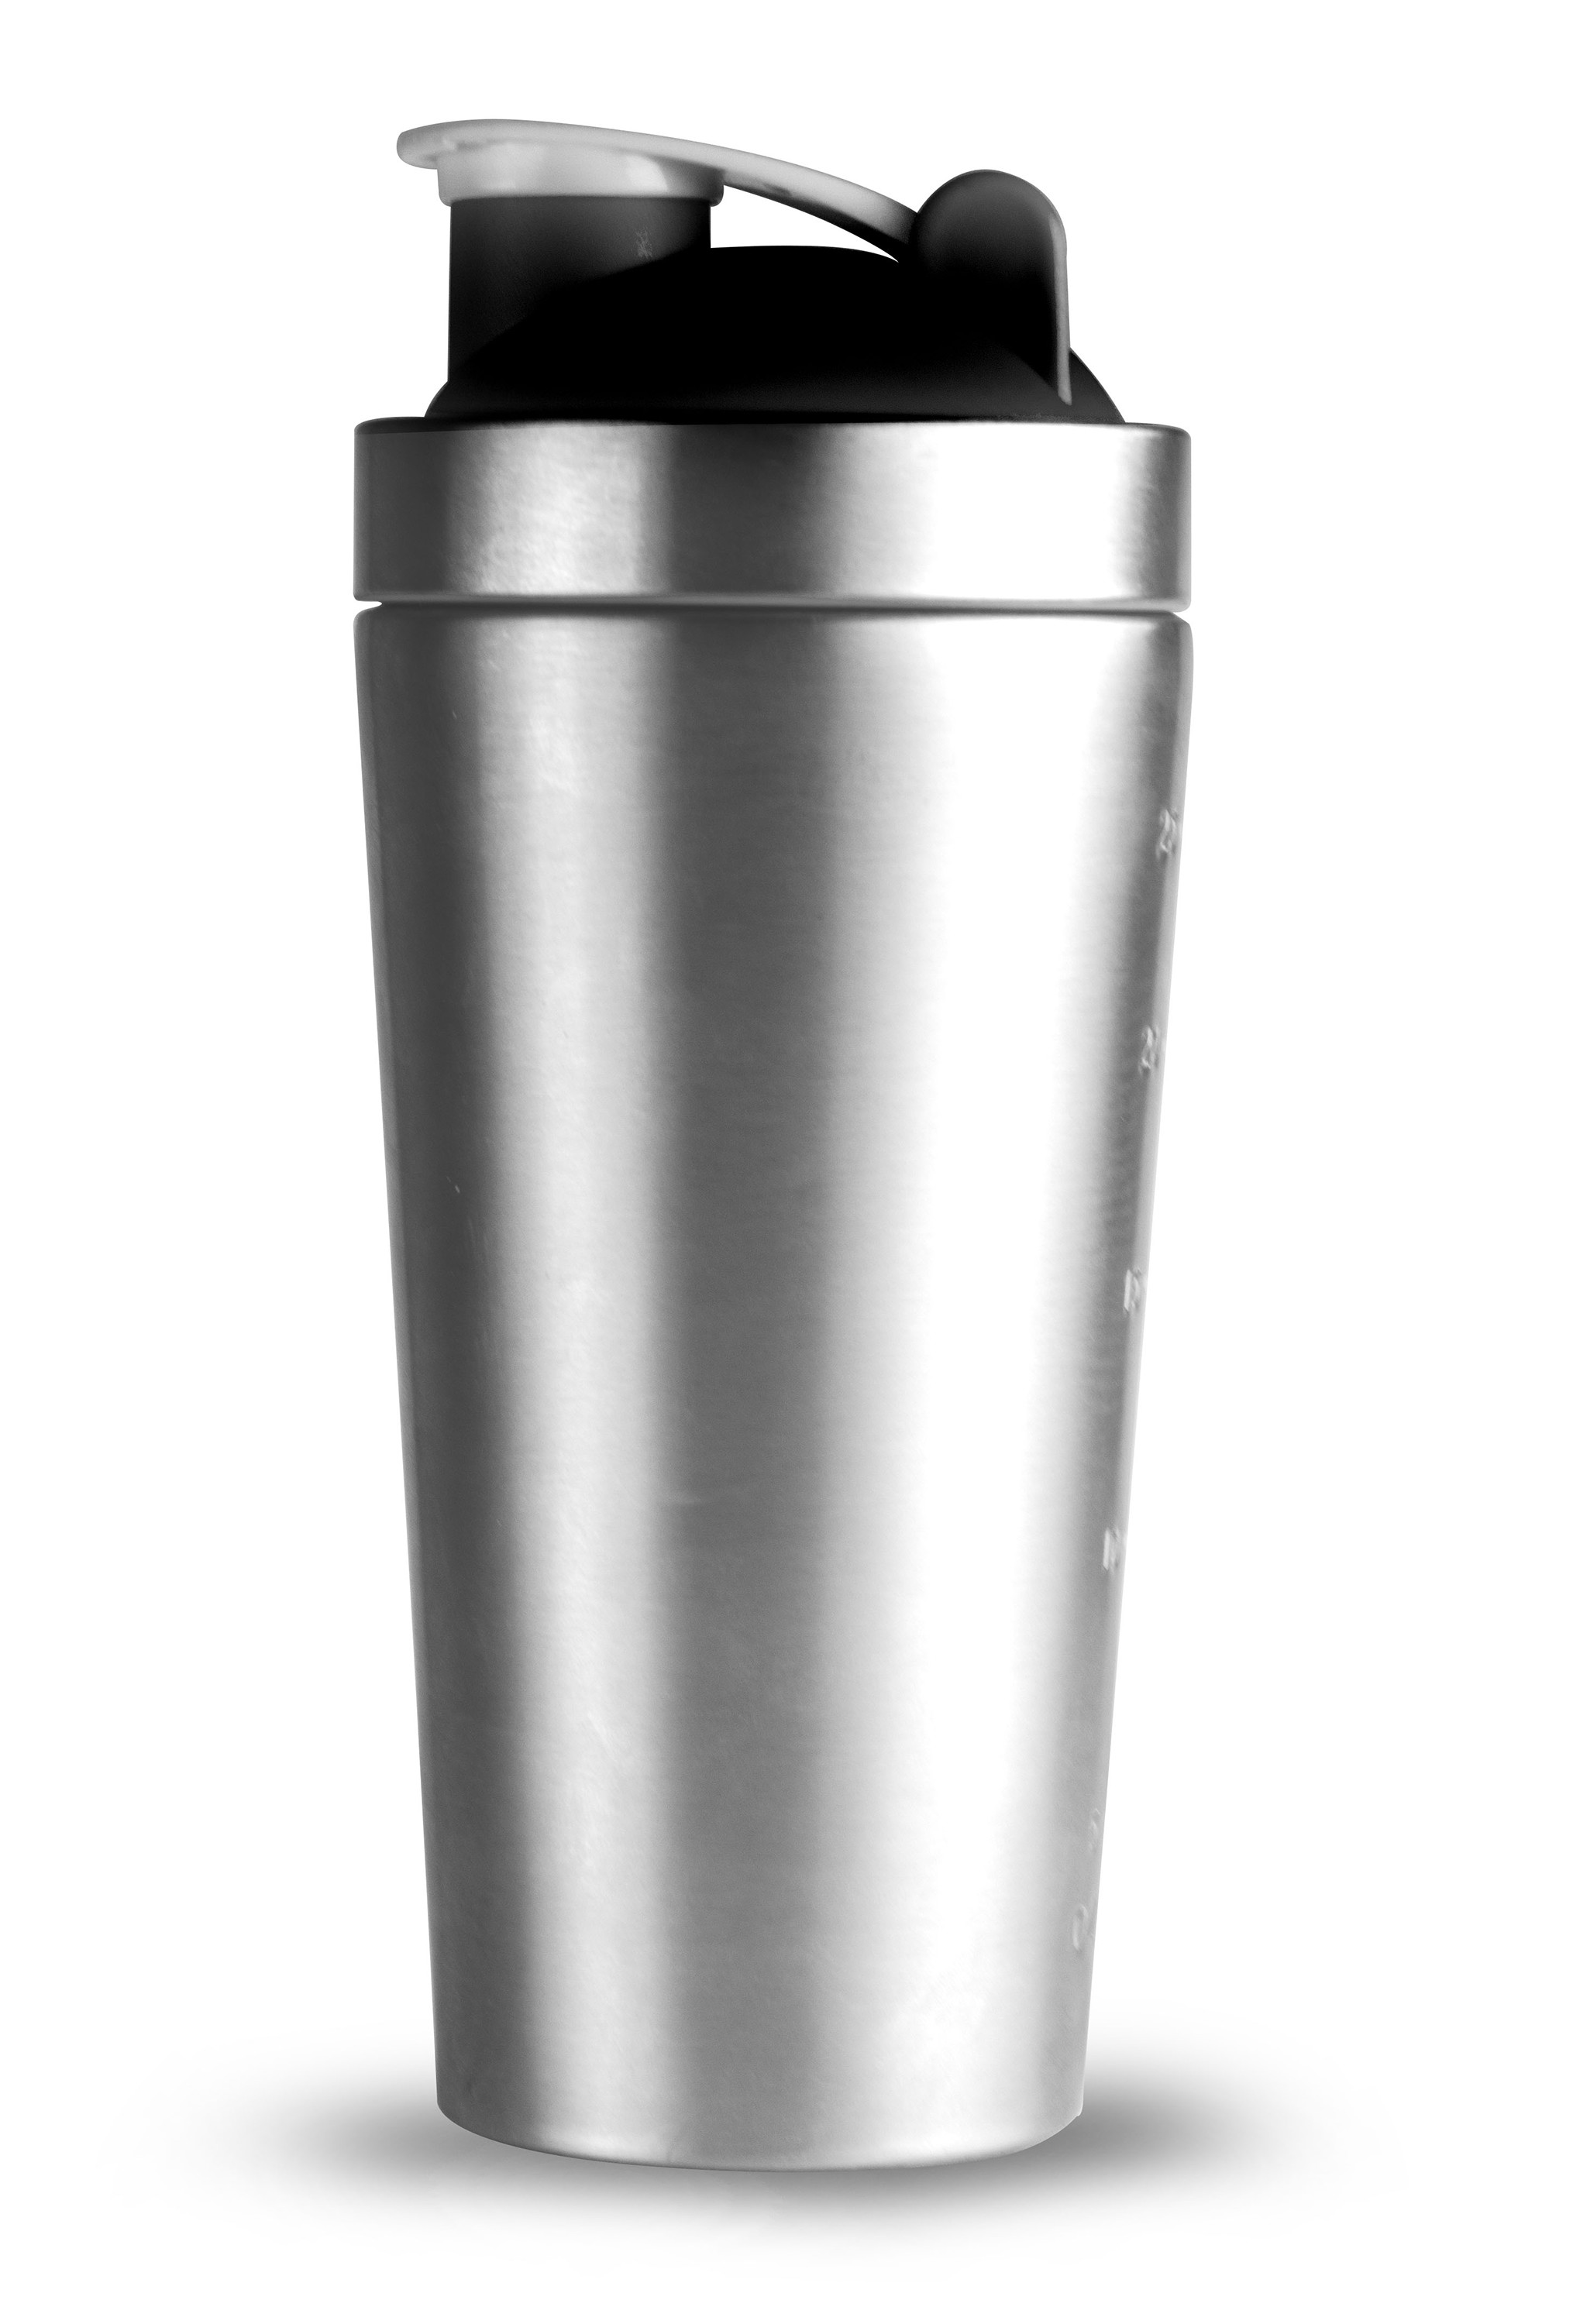 Custom Printed Stainless Steel Shaker Bottle - 30oz with your logo